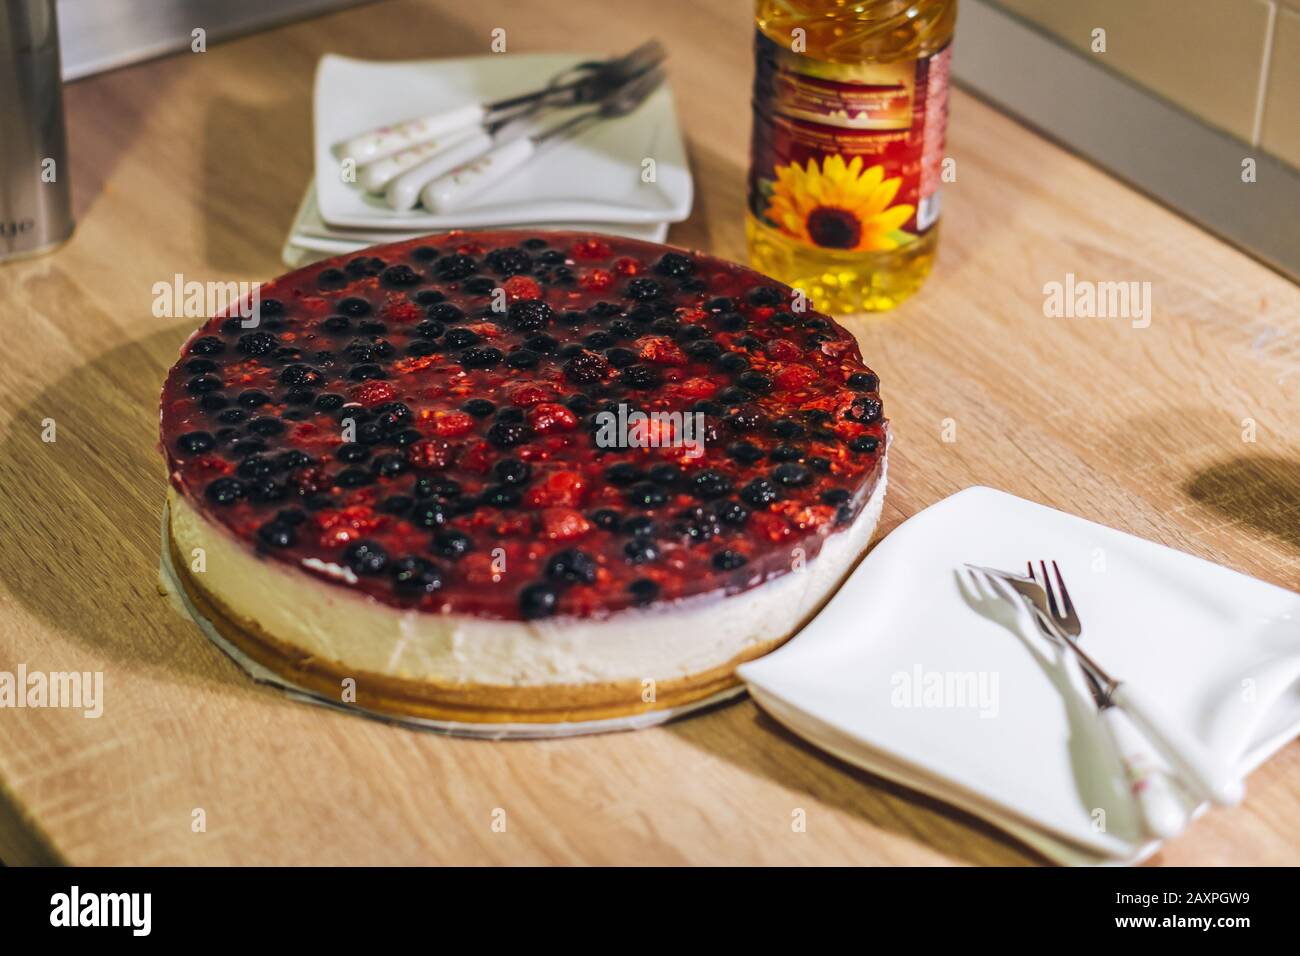 Homemade cheesecake with red fruits topping Stock Photo